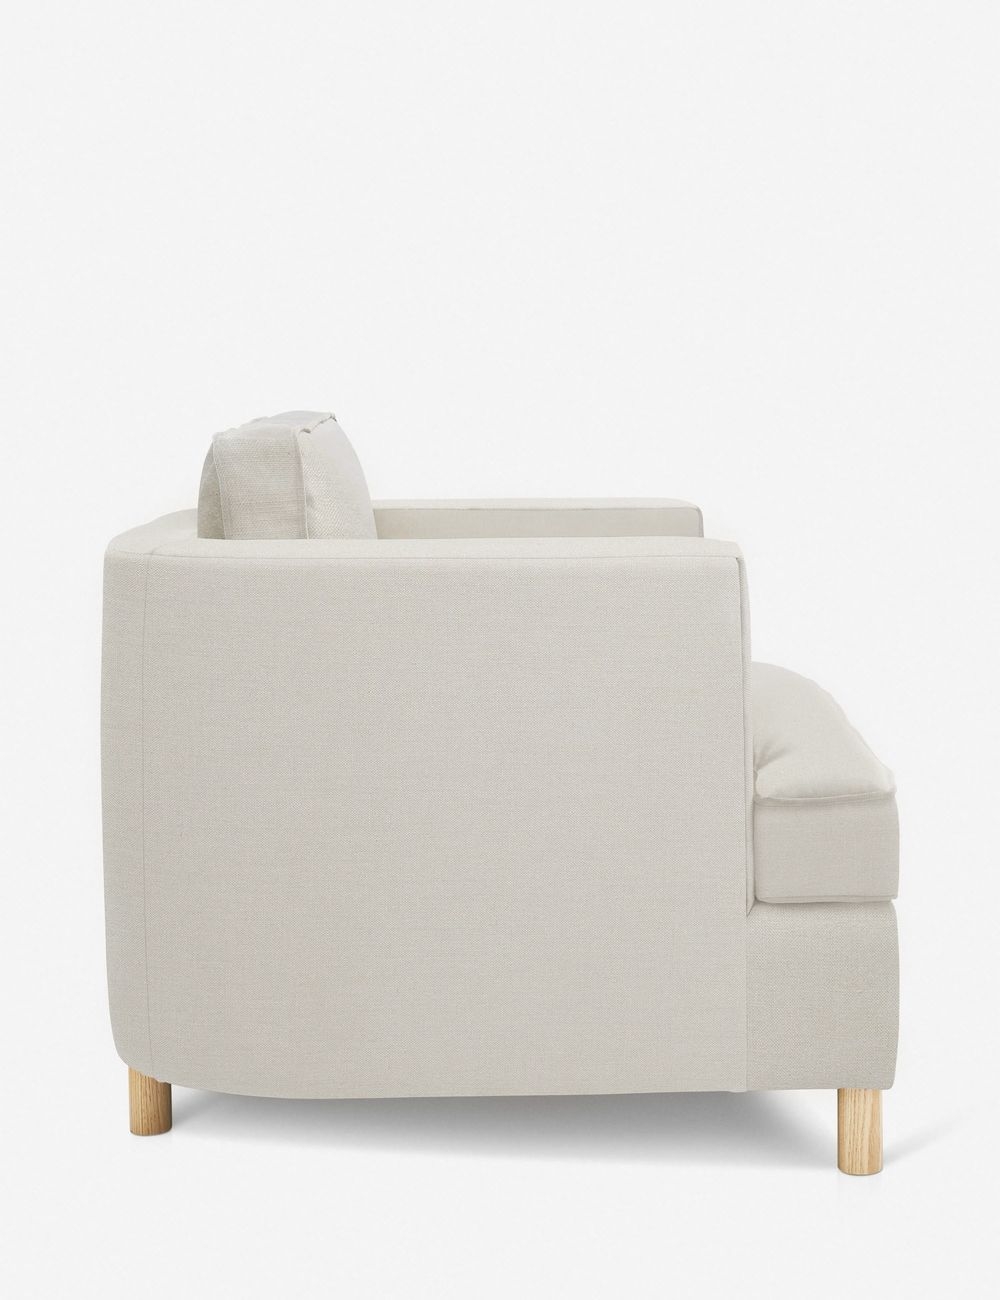 Belmont Accent Chair by Ginny Macdonald - Image 1